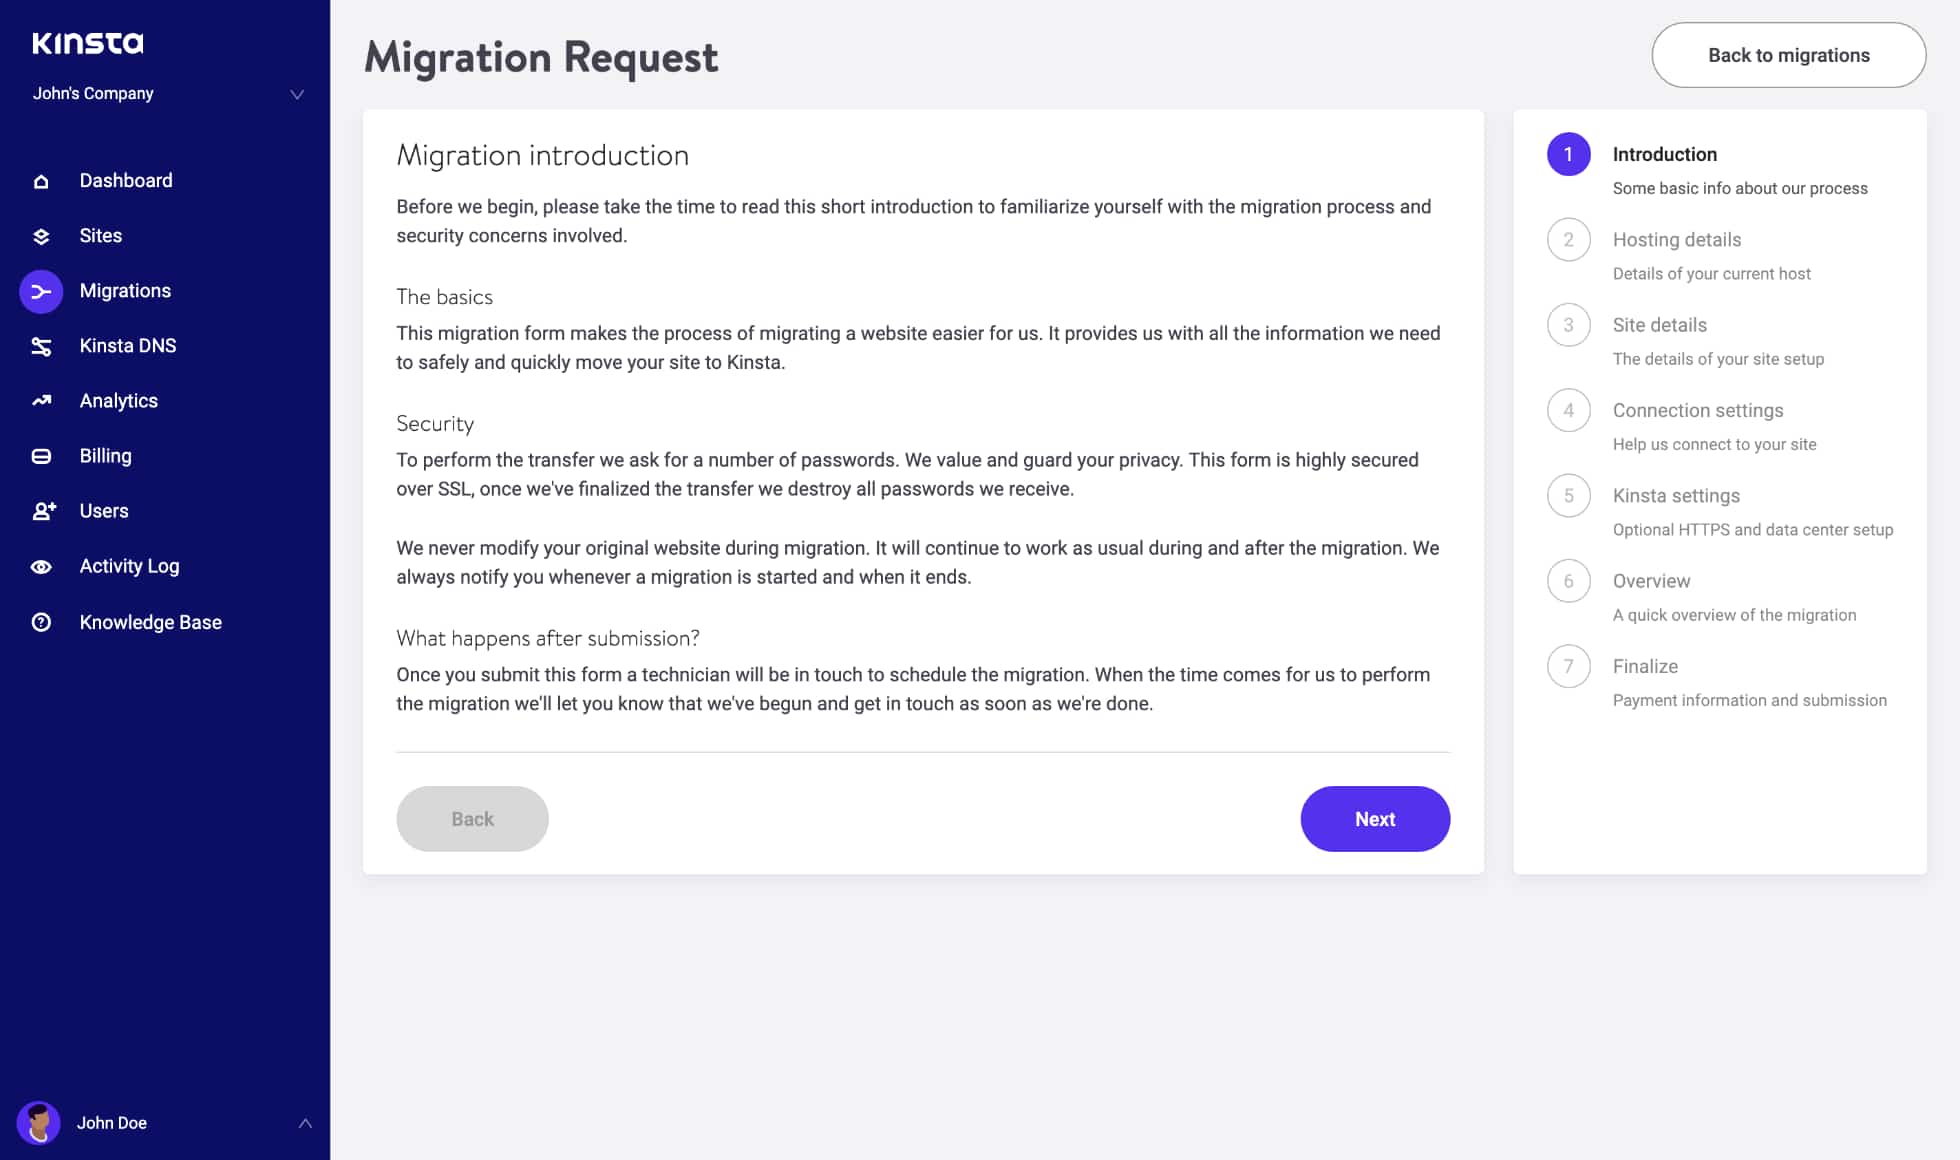 Request site migrations right from the MyKinsta dashboard. Our team will pick up your request and keep you notified of the status. Moving your site to Kinsta usually won’t incur any downtime, and we’ll help you inspect your migrated site before going live